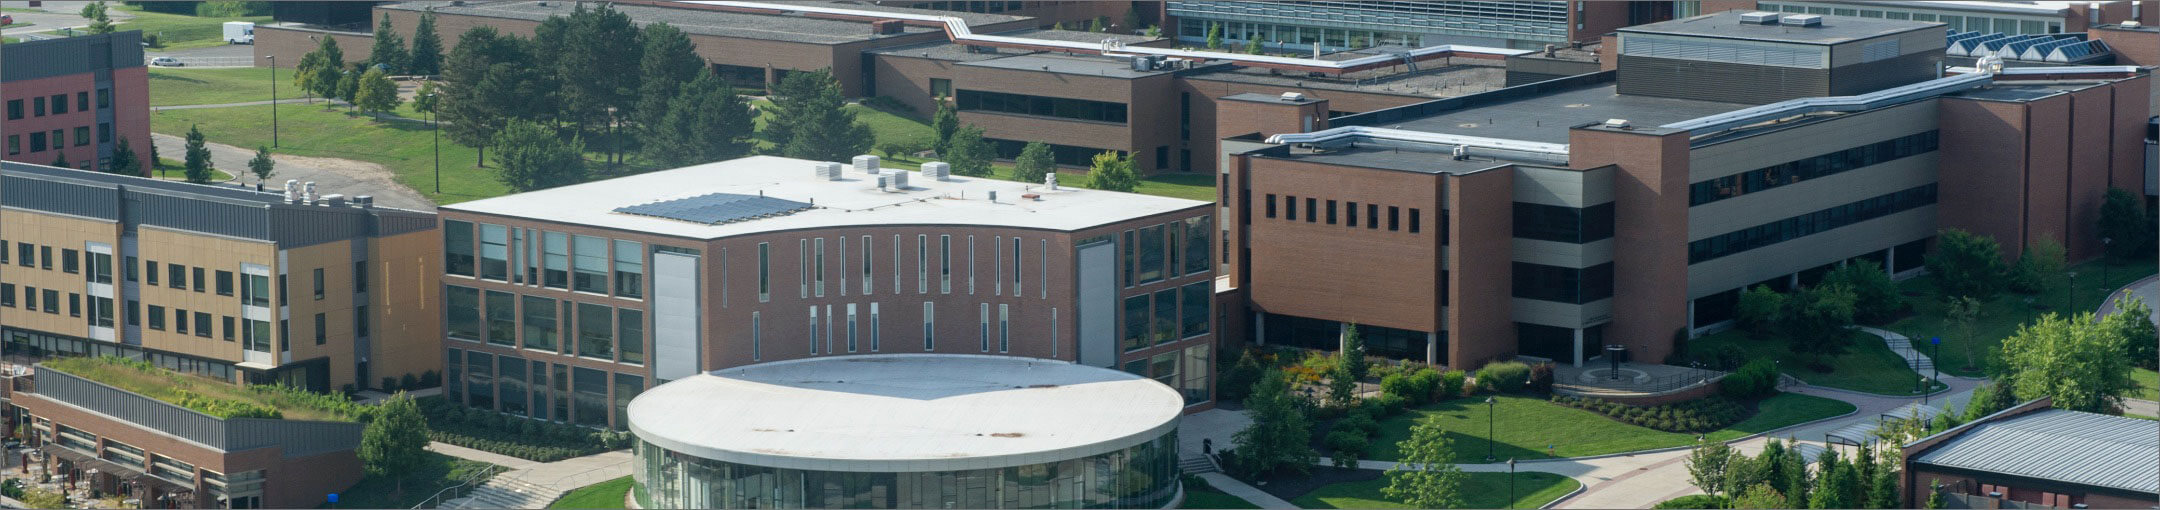 An aerial view of the R I T campus, centered around the Innovation Center.